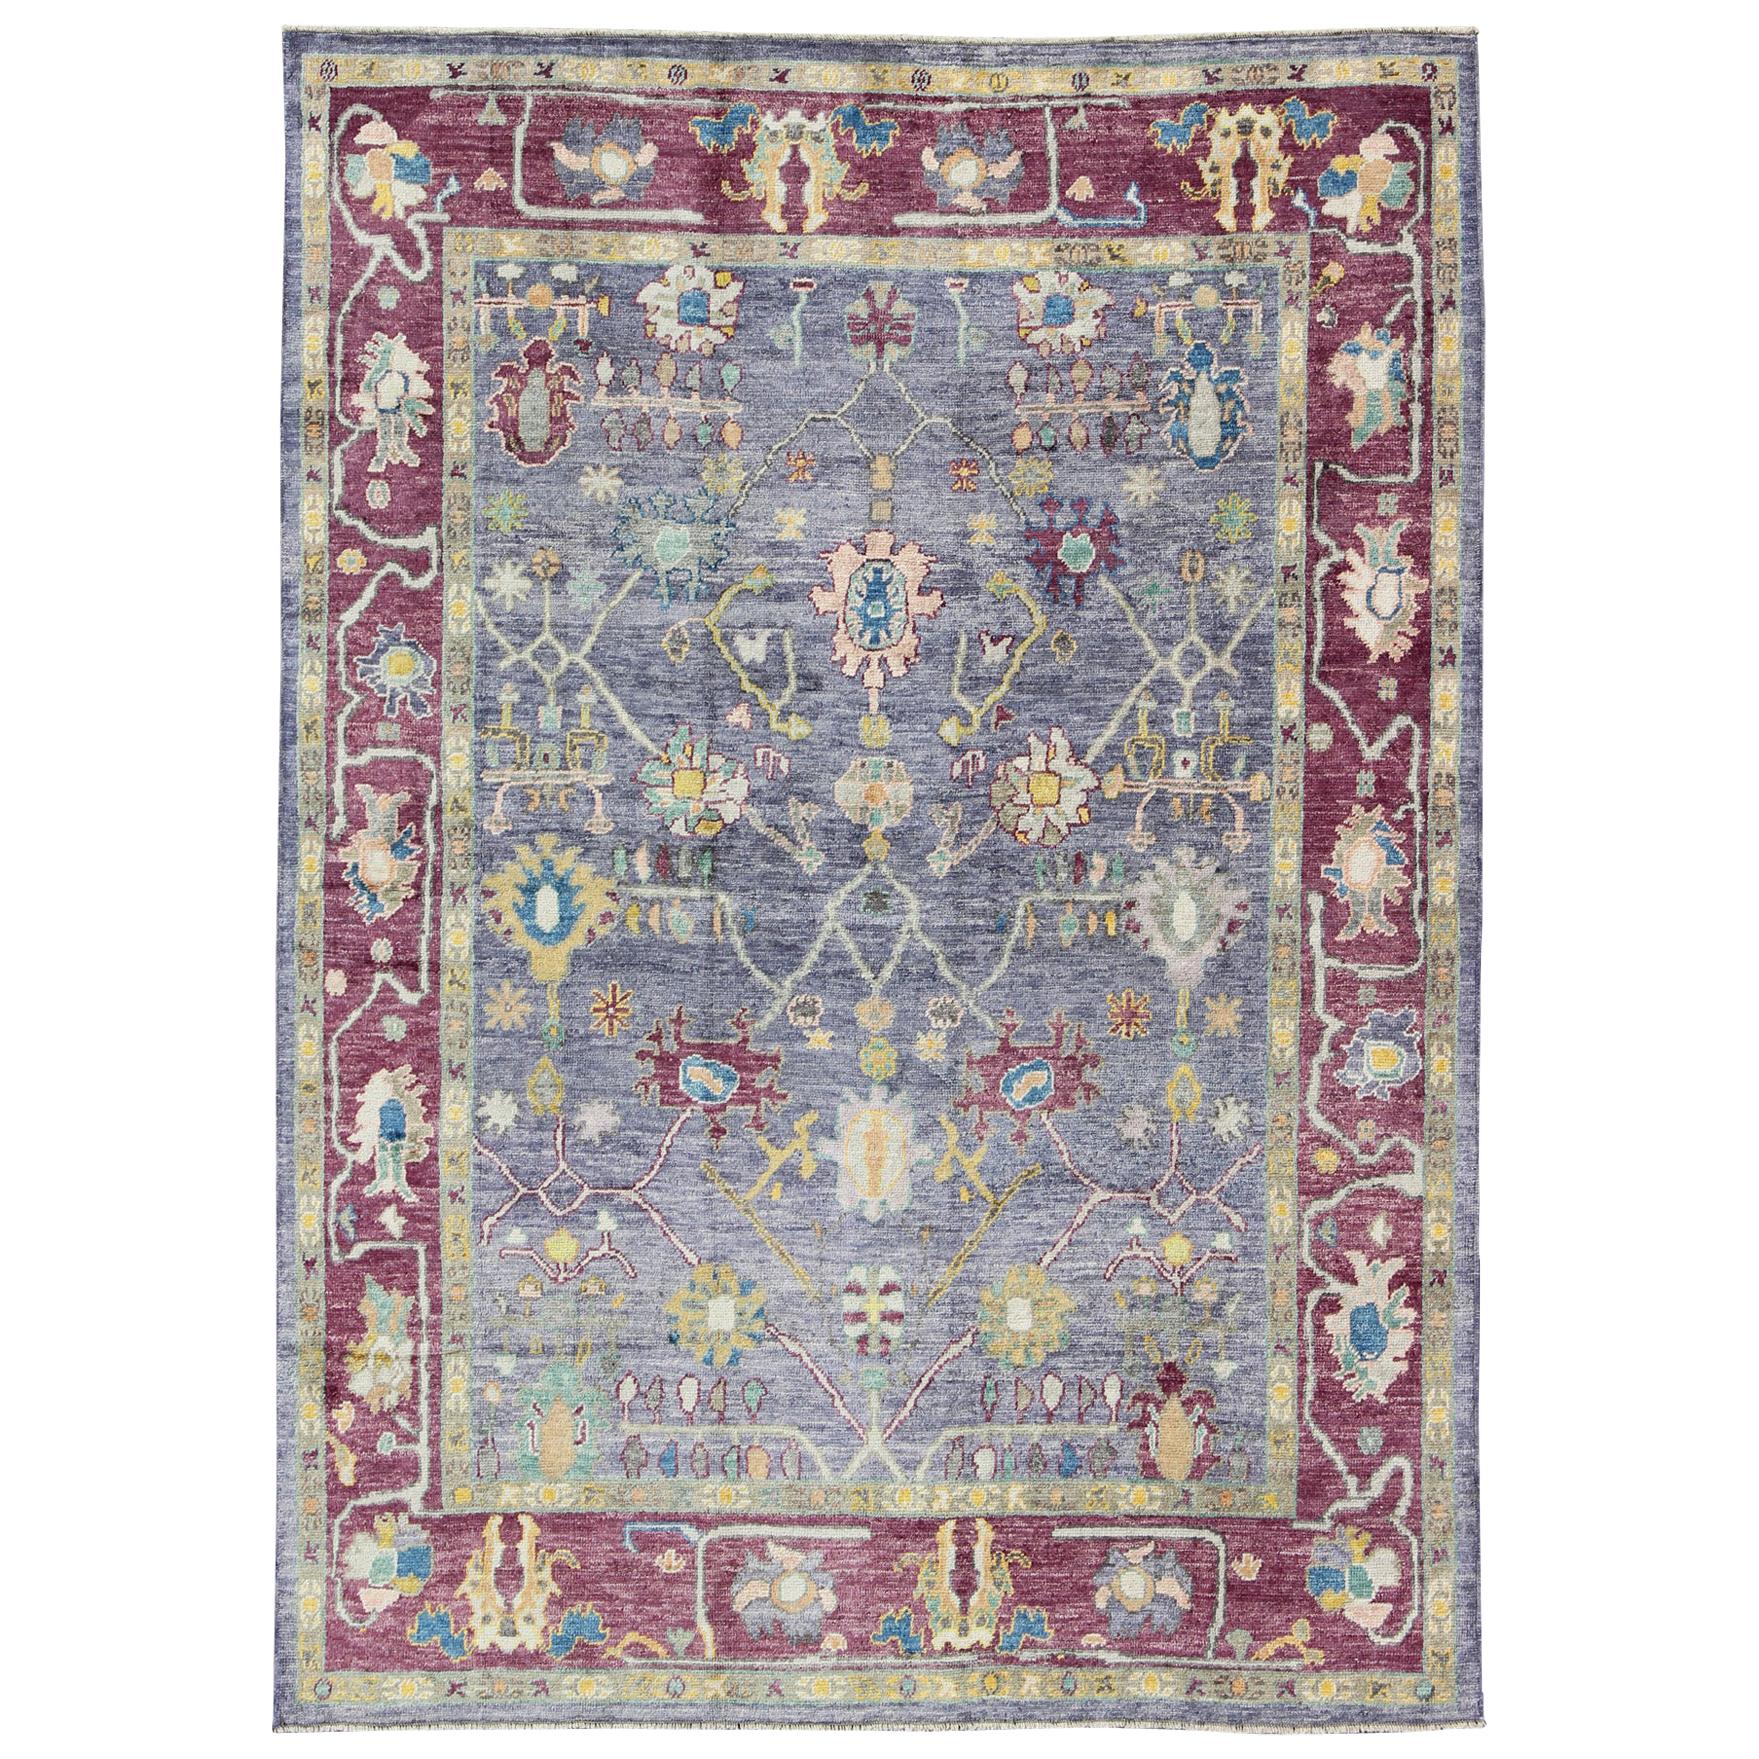 Colorful Turkish Oushak Rug with All-Over Flower Design in Ink Blue & Maroon